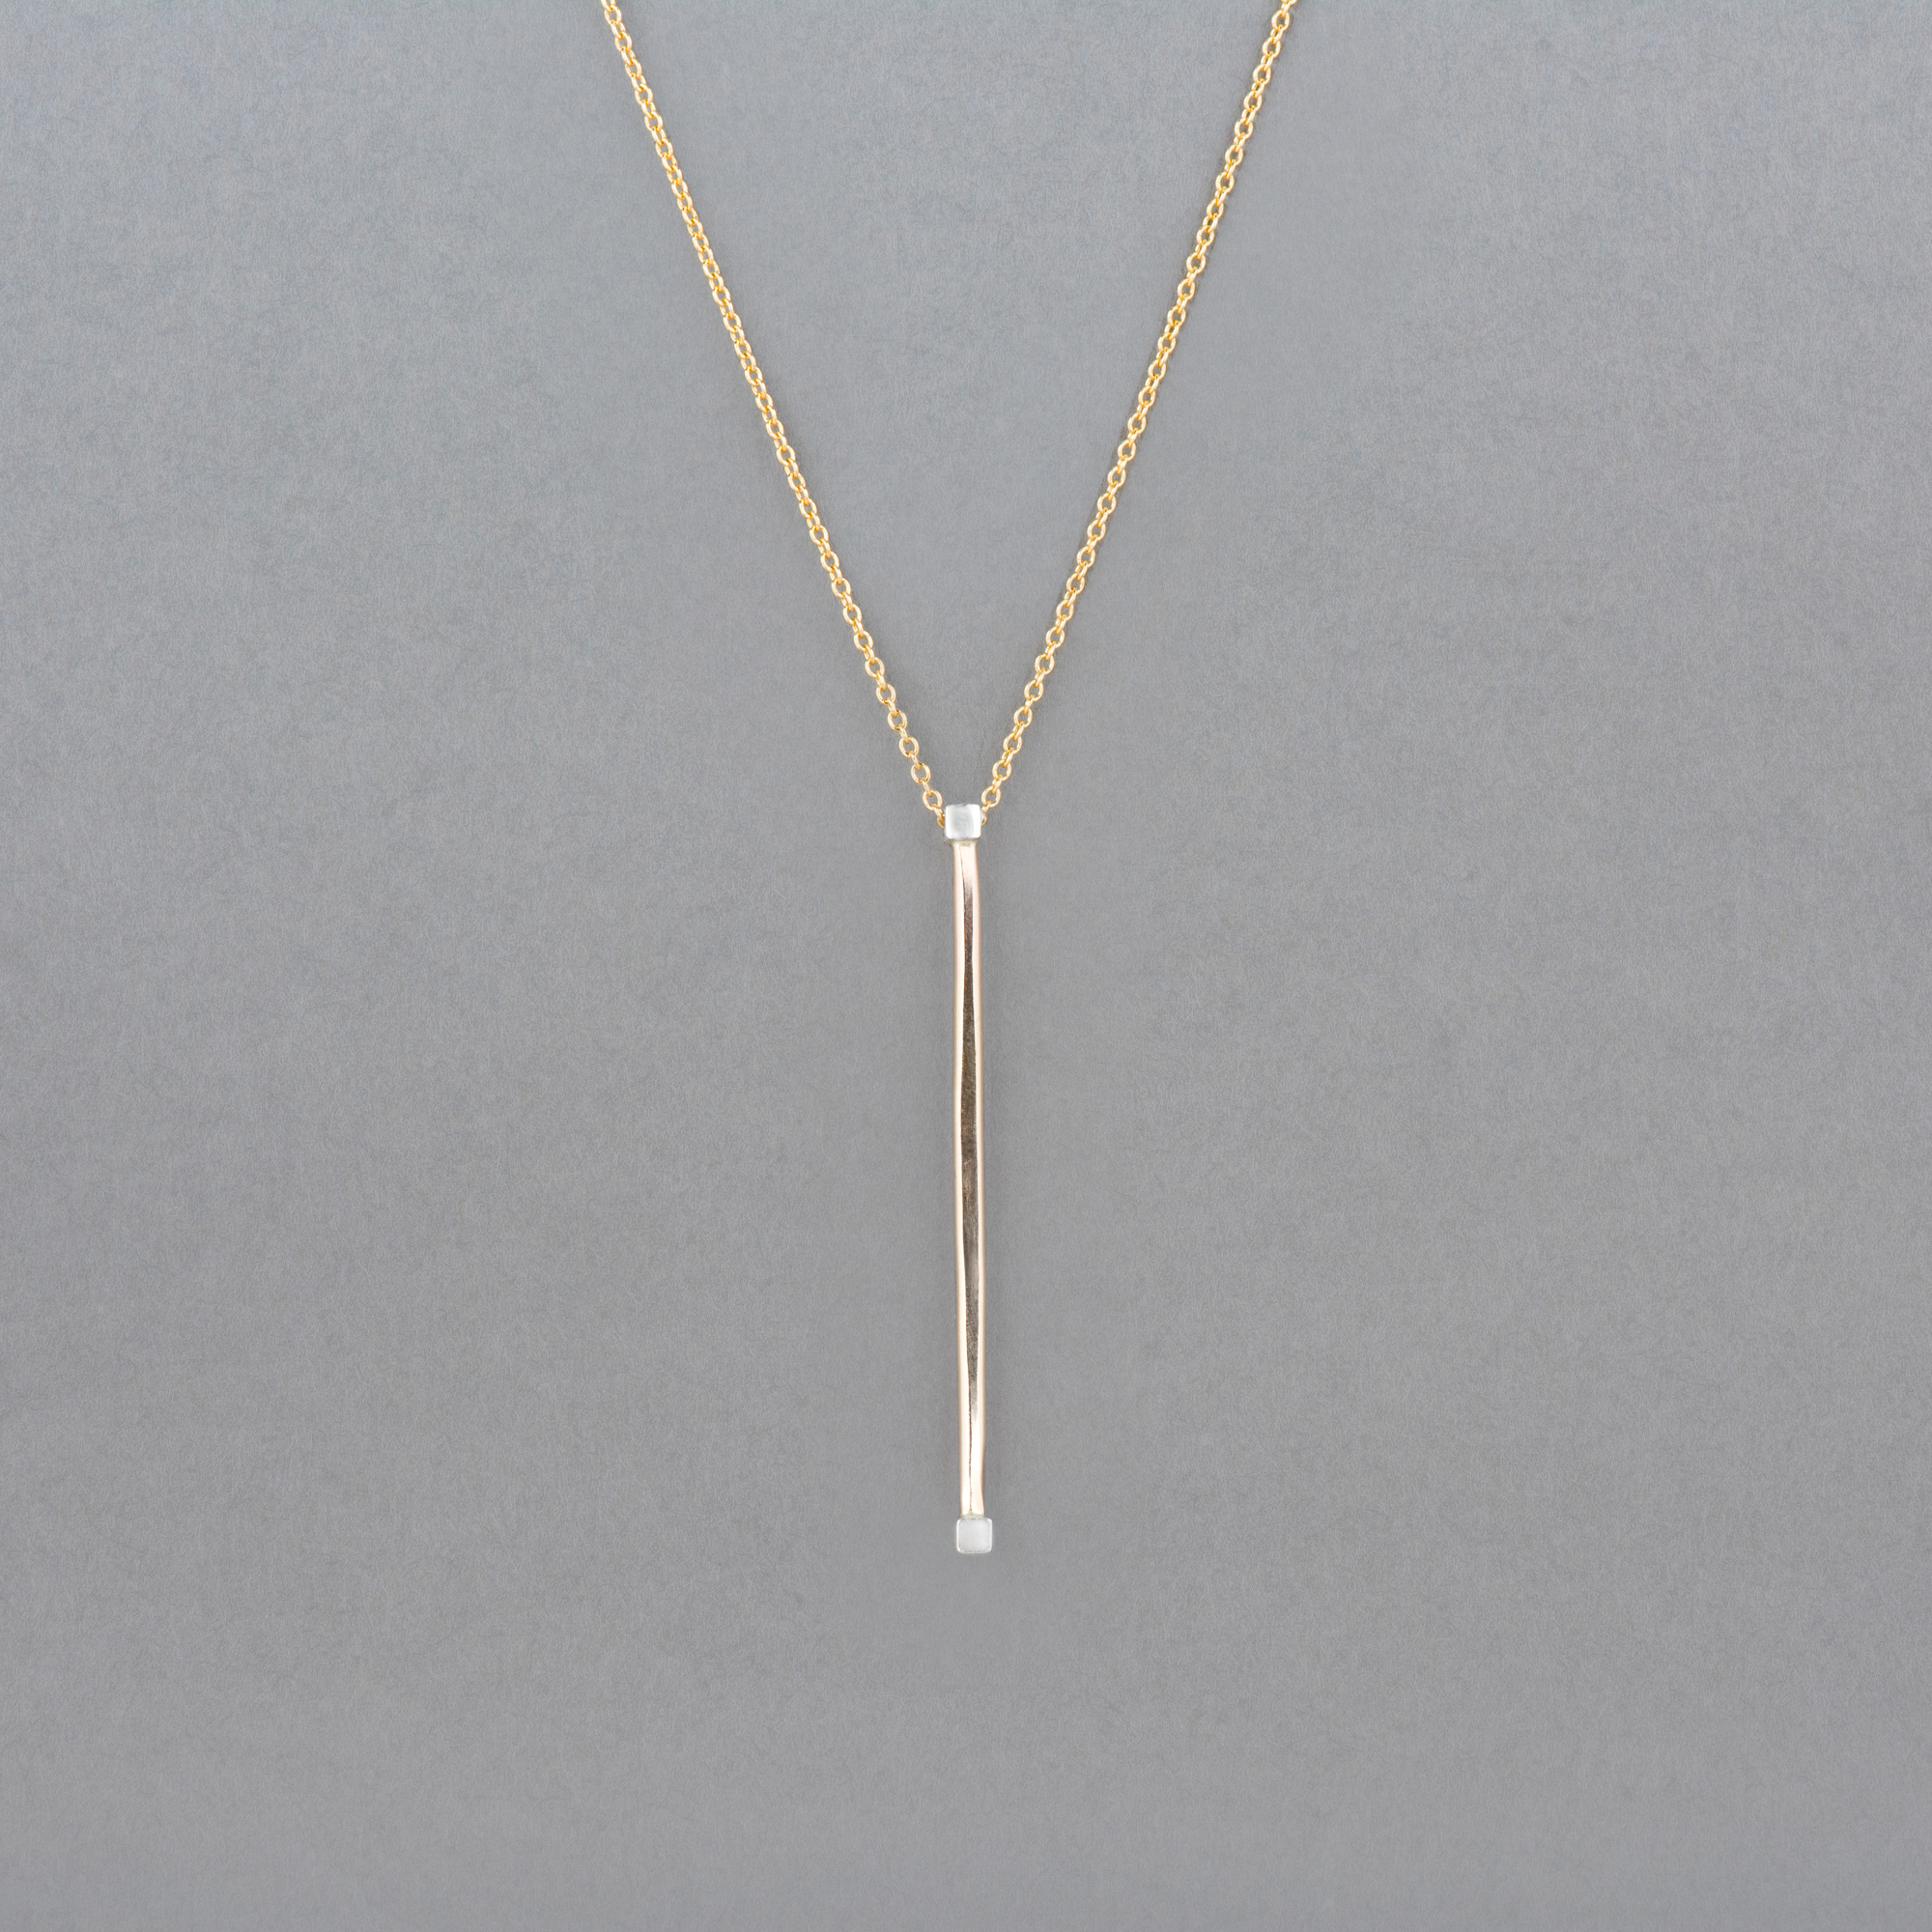 Lone Star Bar Necklace, Gold-Fill  | Tejas Collection by Haley Lebeuf